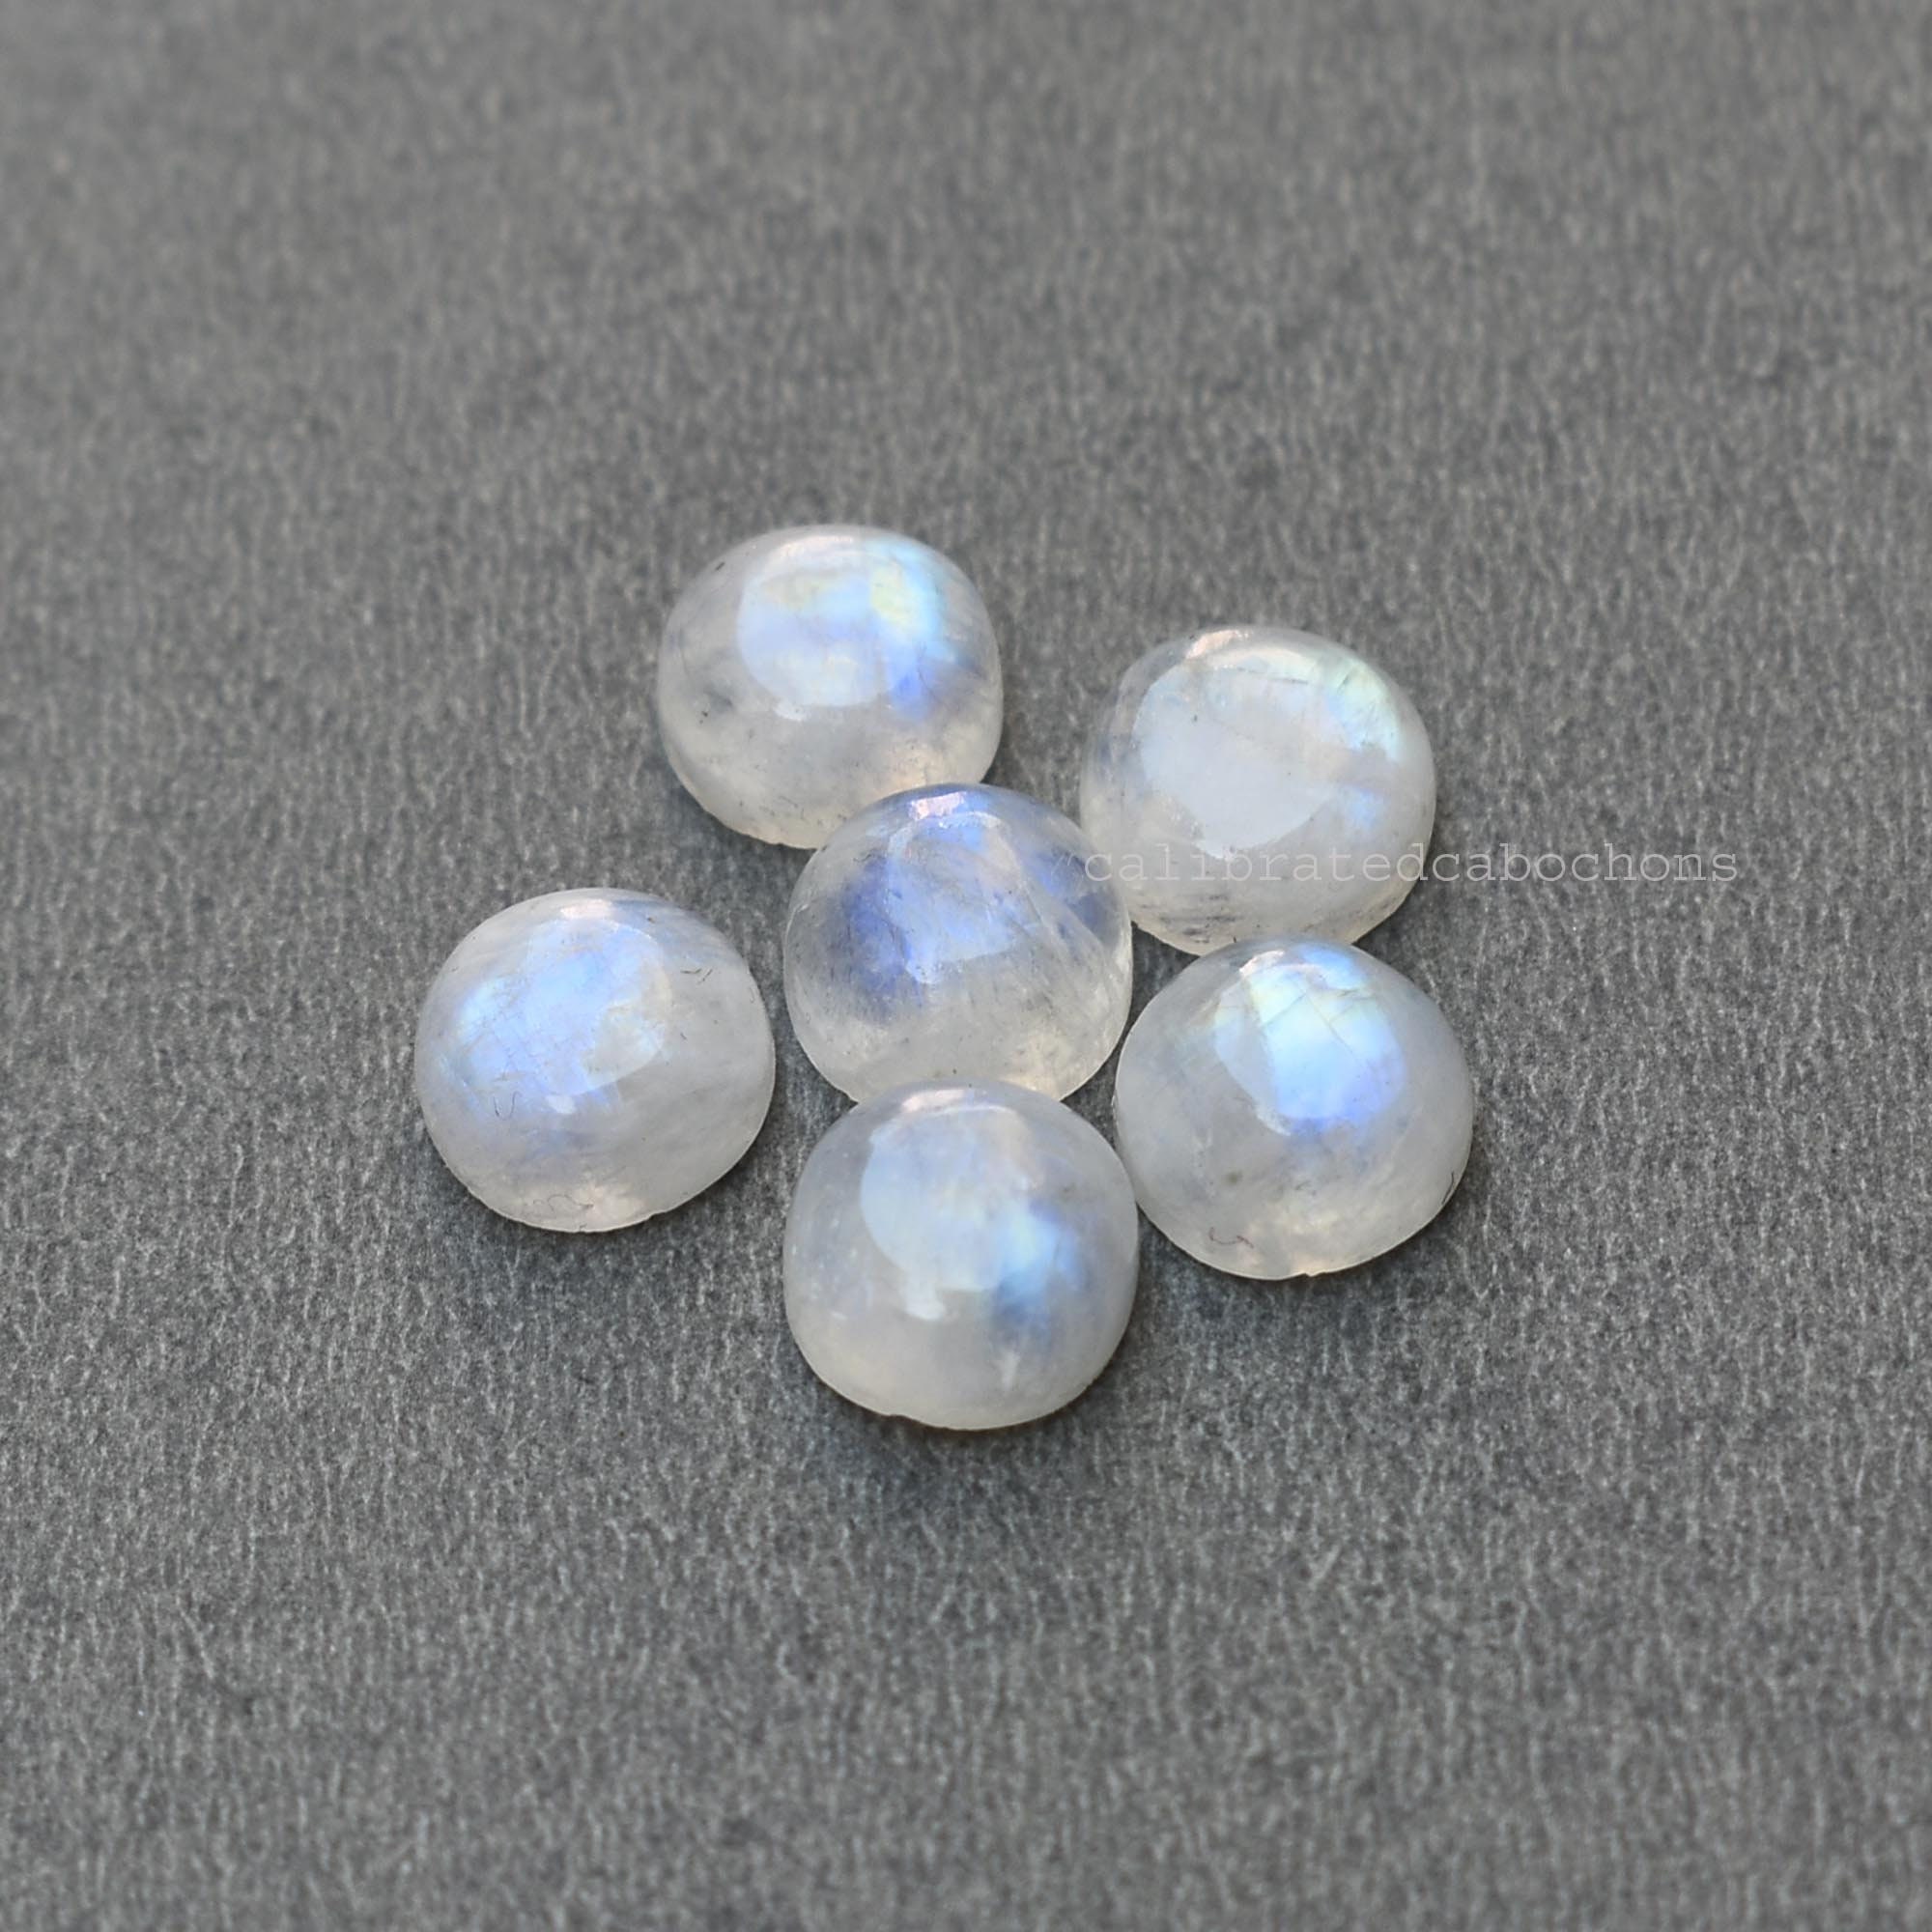 ROUND CABOCHON-CUT NATURAL RAINBOW MOONSTONE SIZES AVAILABLE FROM 3mm 20mm 